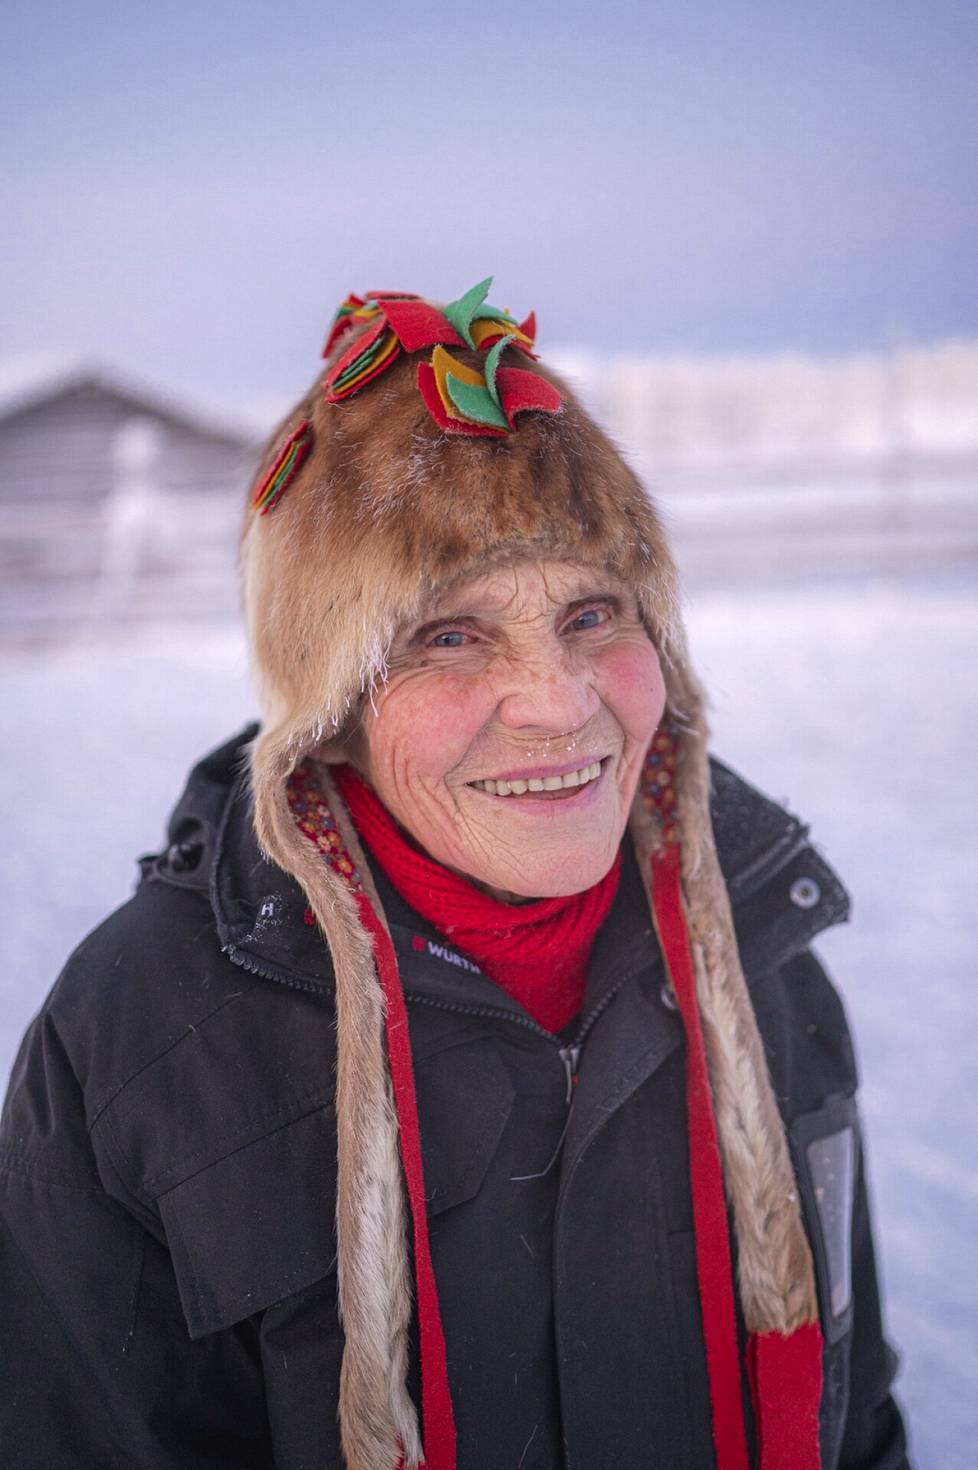 "At first we talked about why the midwife came here to take care of the reindeer", says Aino Kiuru.  Today, Kiuru feels that he has become accepted in reindeer husbandry circles.